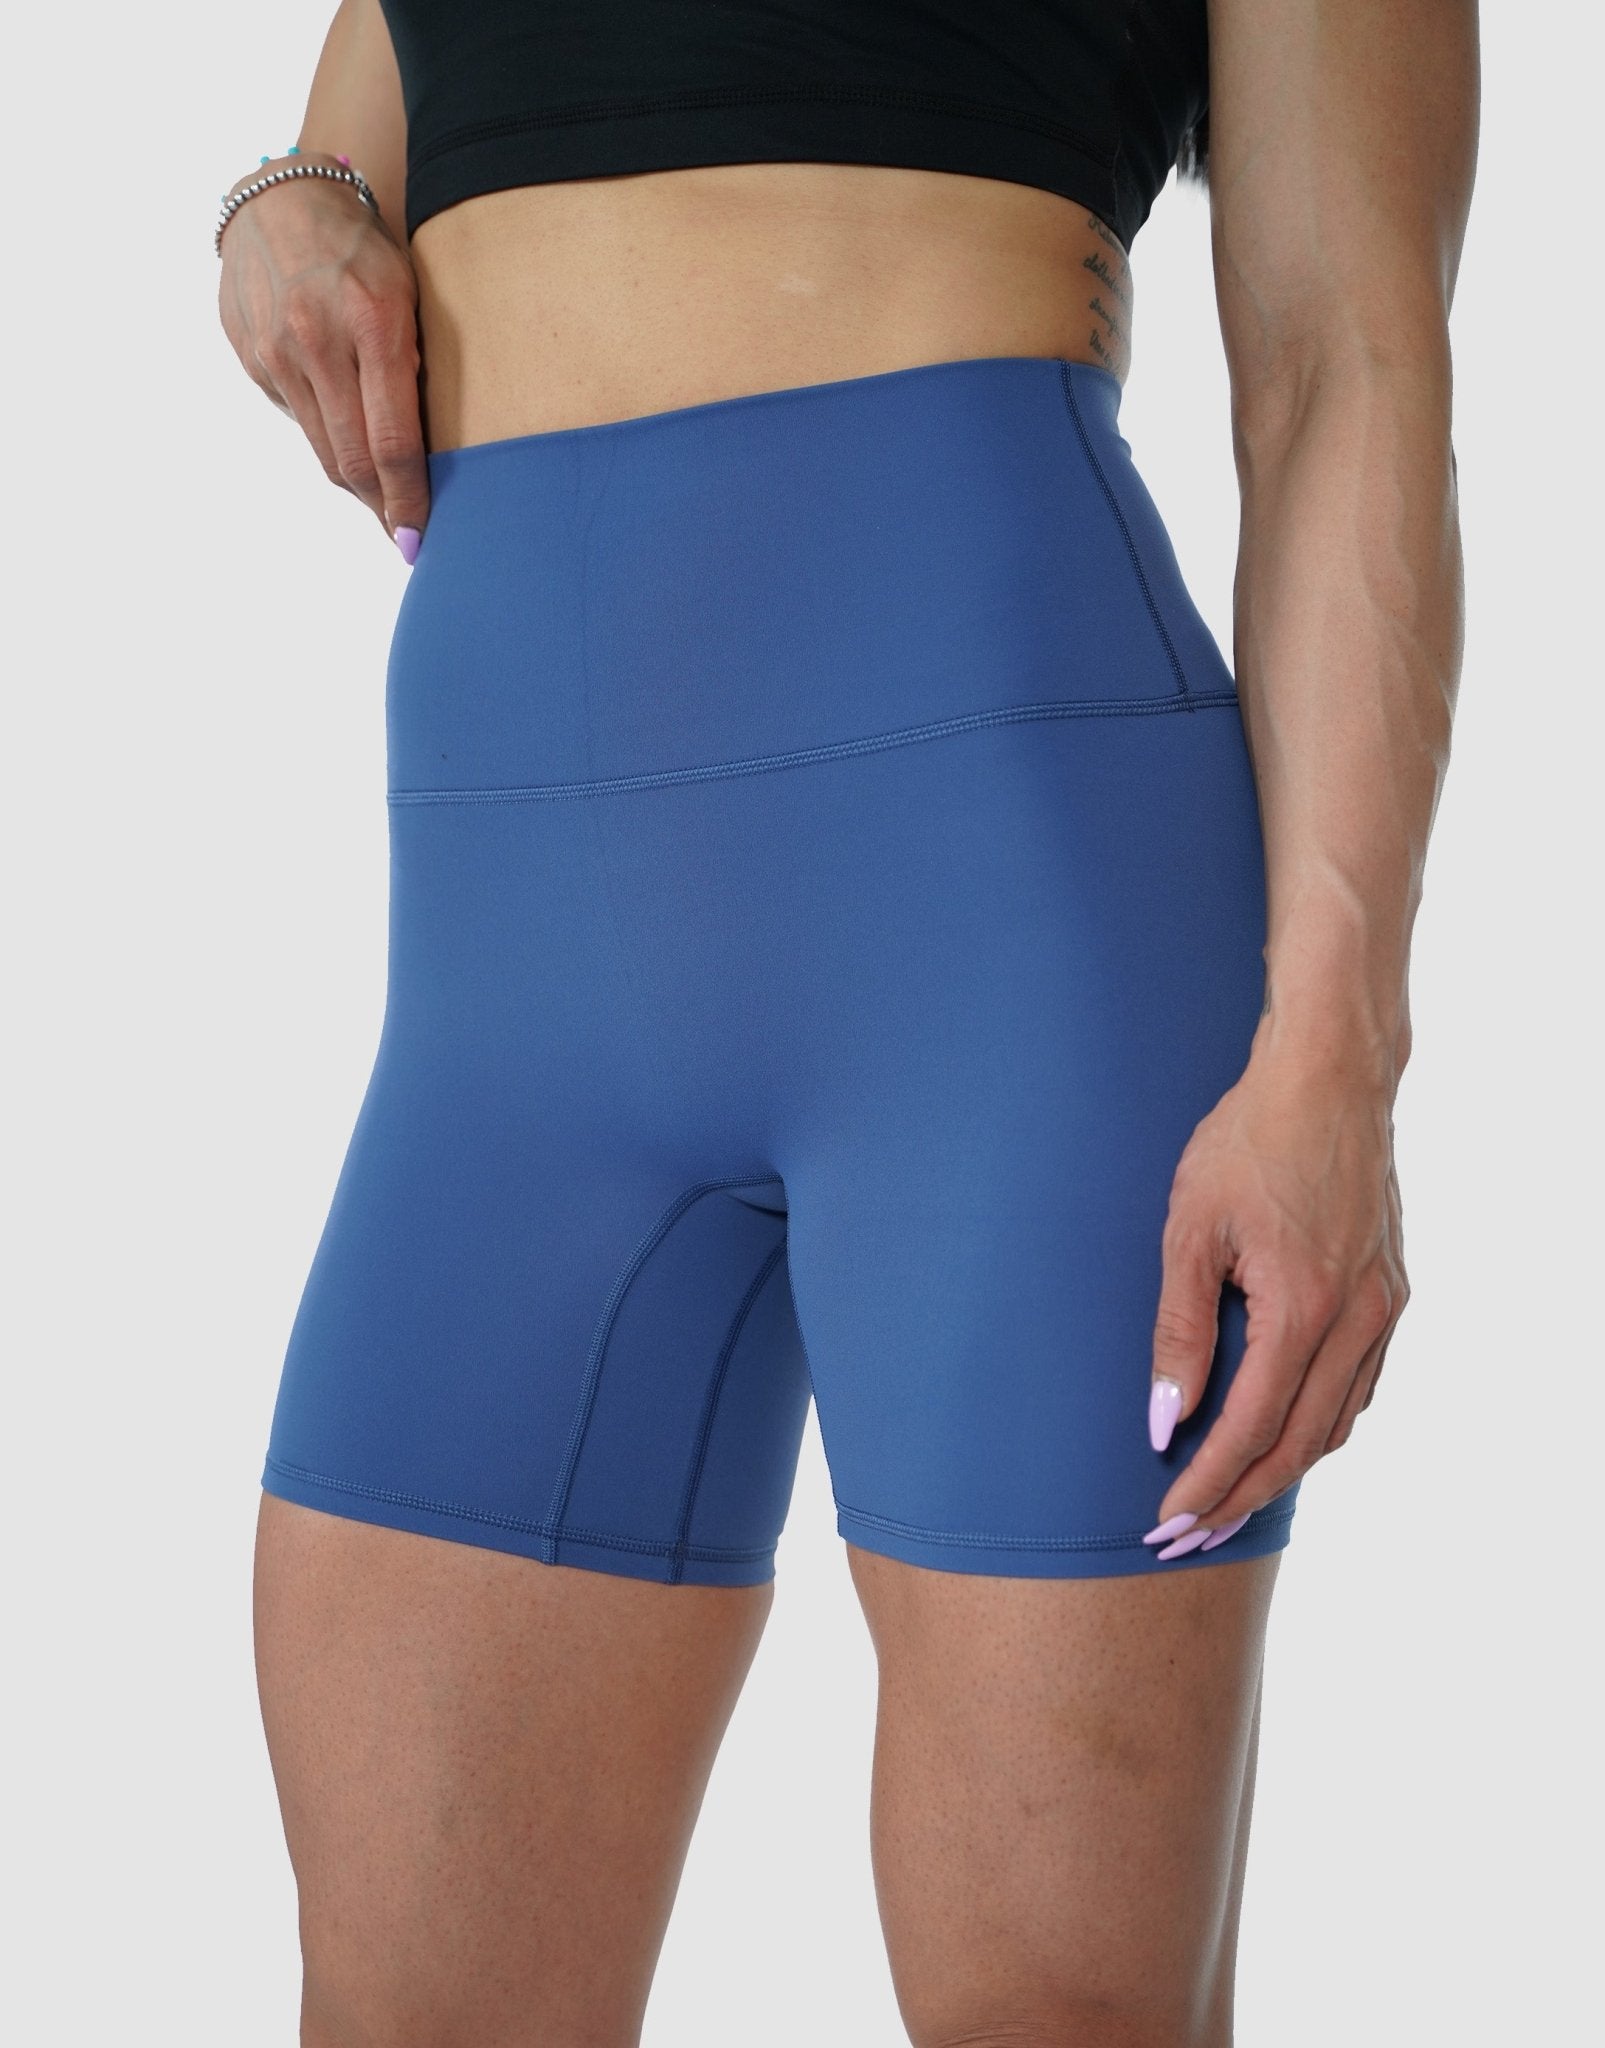 The Summer Simplicity Collection is coming soon with the NEW Agility Pocket  Bike Shorts, our new ultimate performance short! 😍💕 Fea